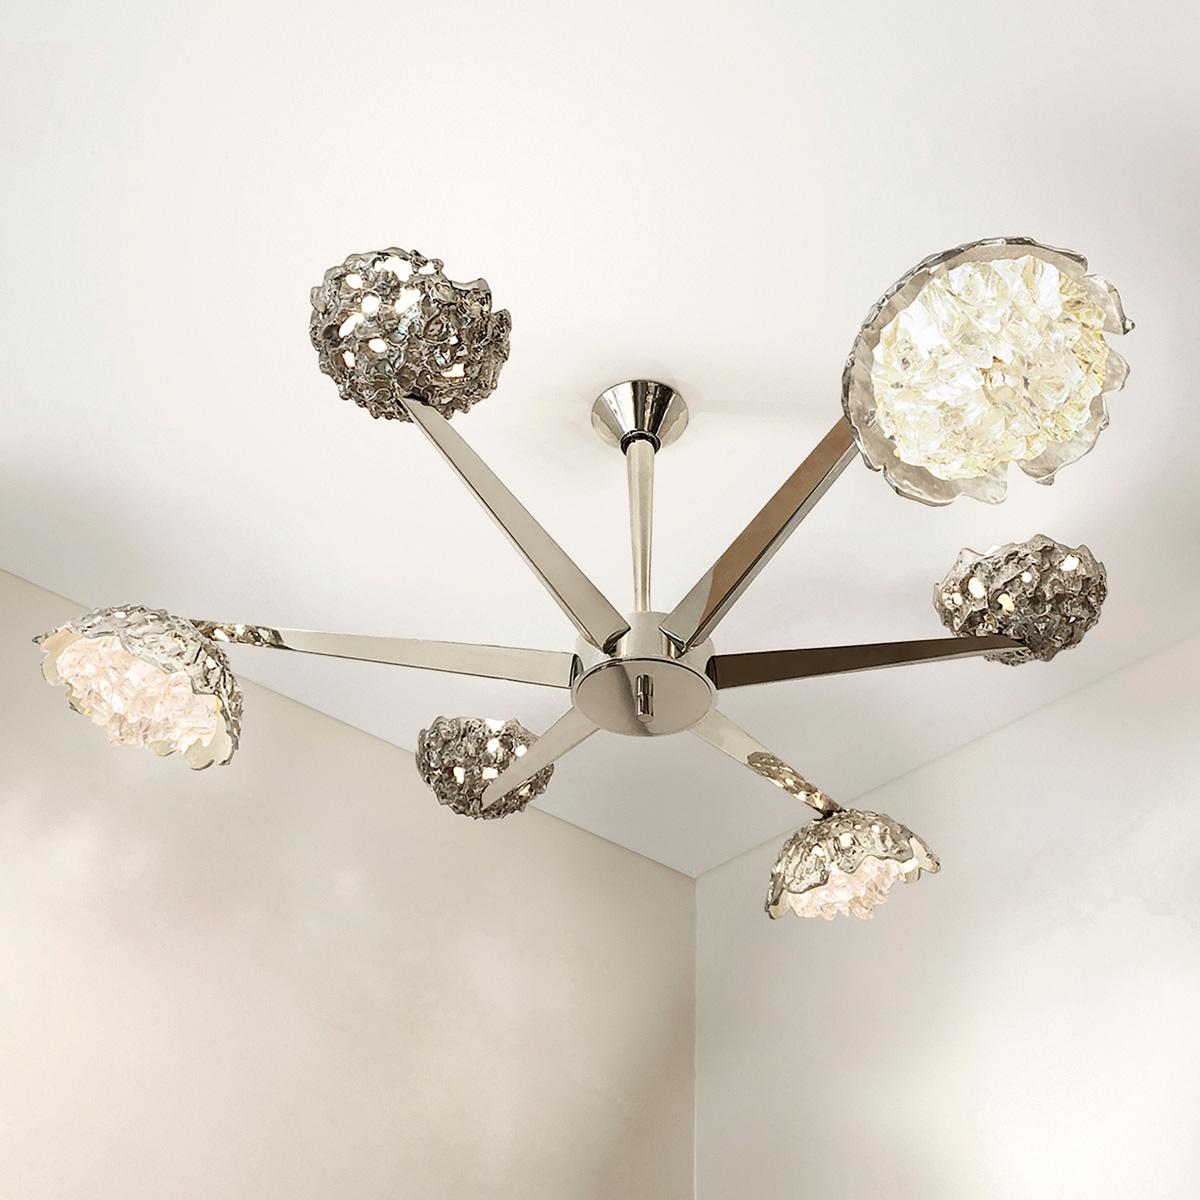 The Fusione ceiling fixture highlights the contrast between organic forms and sleek geometric lines; Cast brass shades with irregular glass crystals sprout from polished V shaped arms. The first images show the fixture in our polished nickel